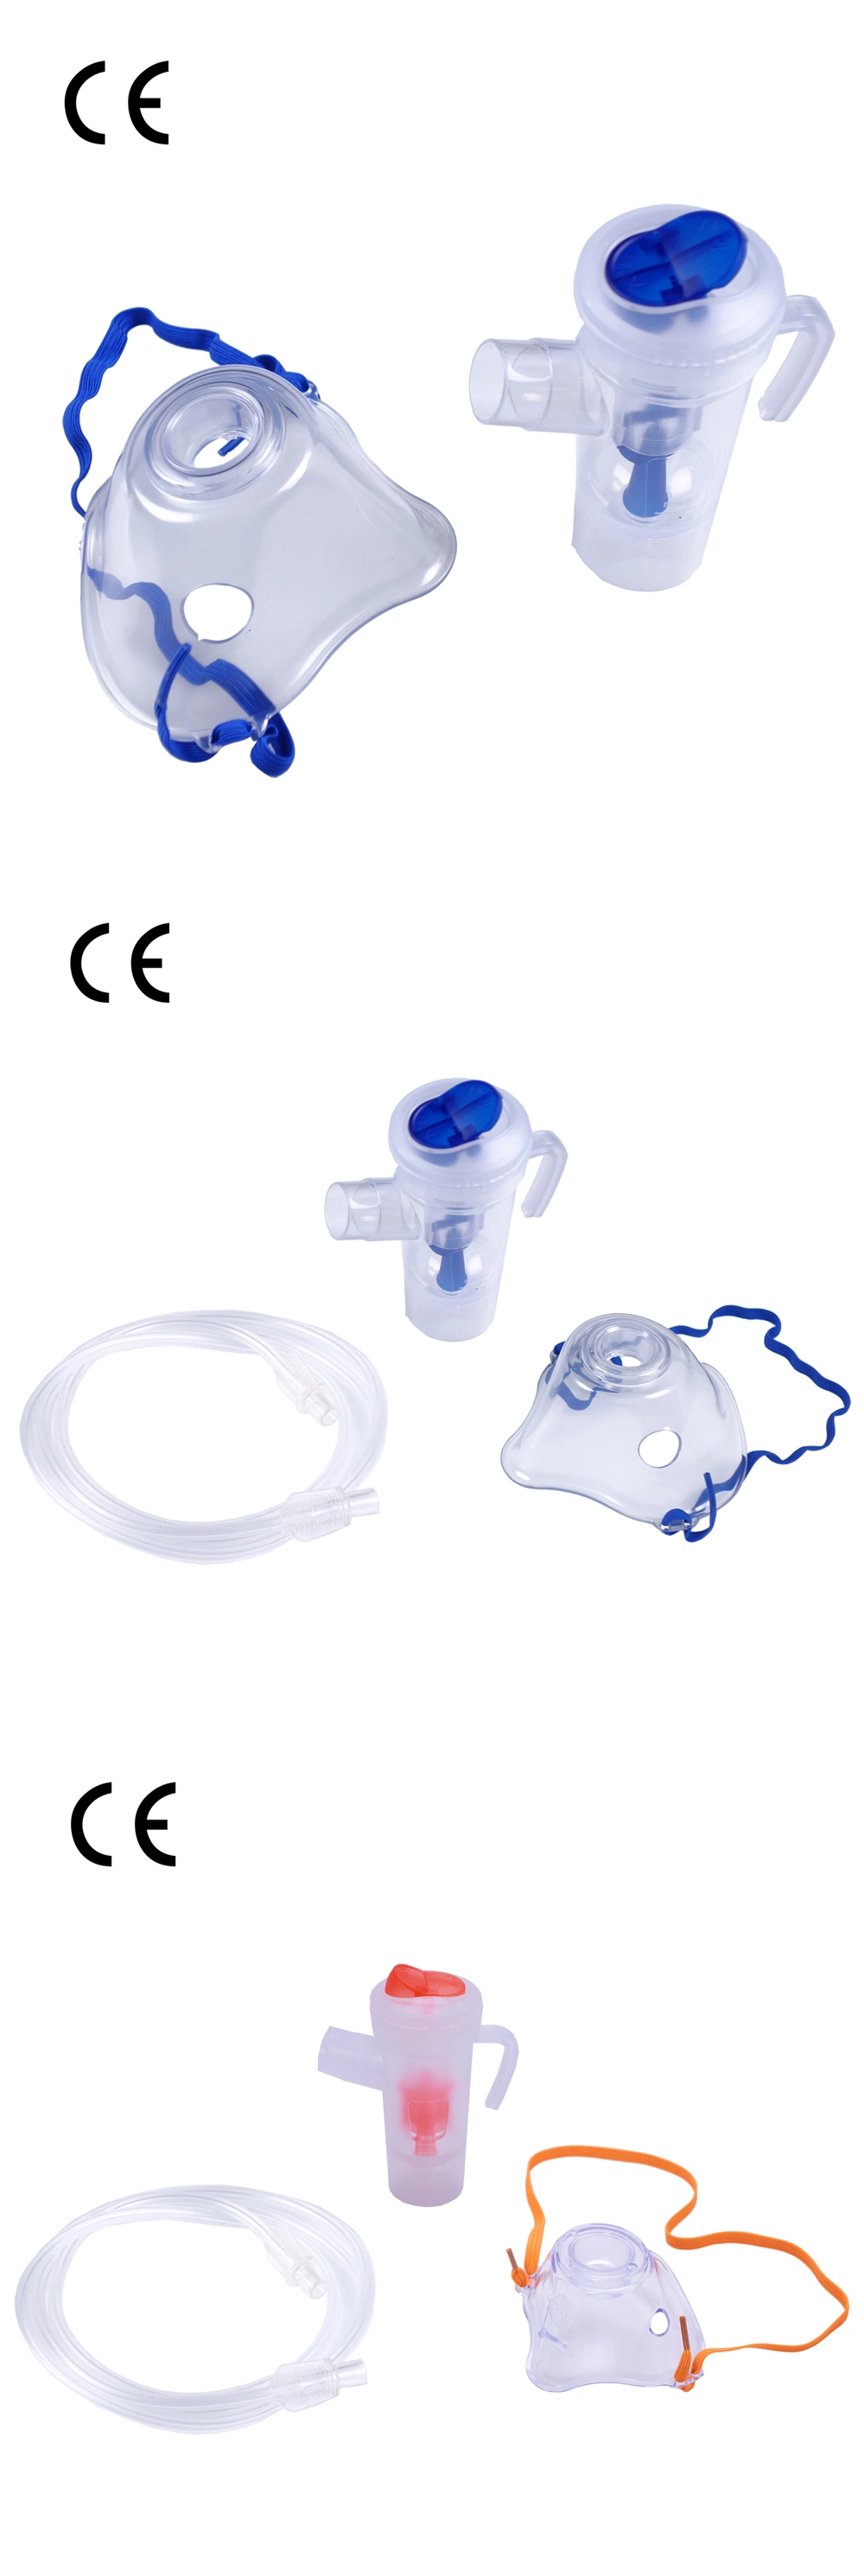 CE/ISO Nebulizer Cup Factory Nebulizer Chamber Nebulizer Cup Hospital and Home Use Nebulizer Cup Kit Nebulizer with Button Kit Nebulizer Oxygen Kit with Mask